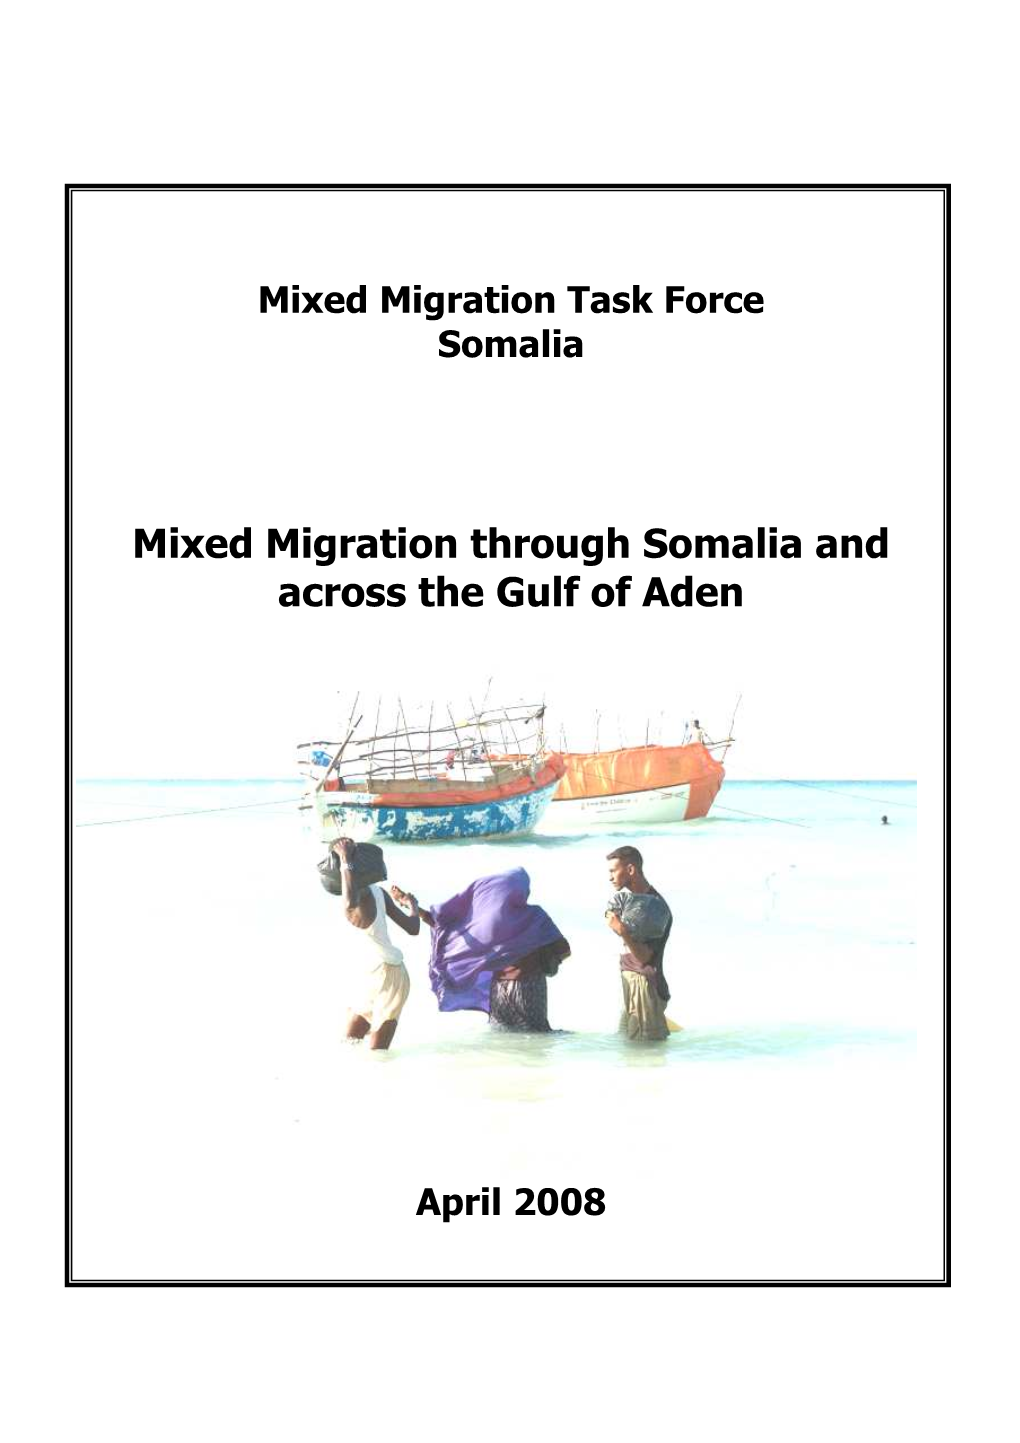 Mixed Migration Through Somalia and Across the Gulf of Aden